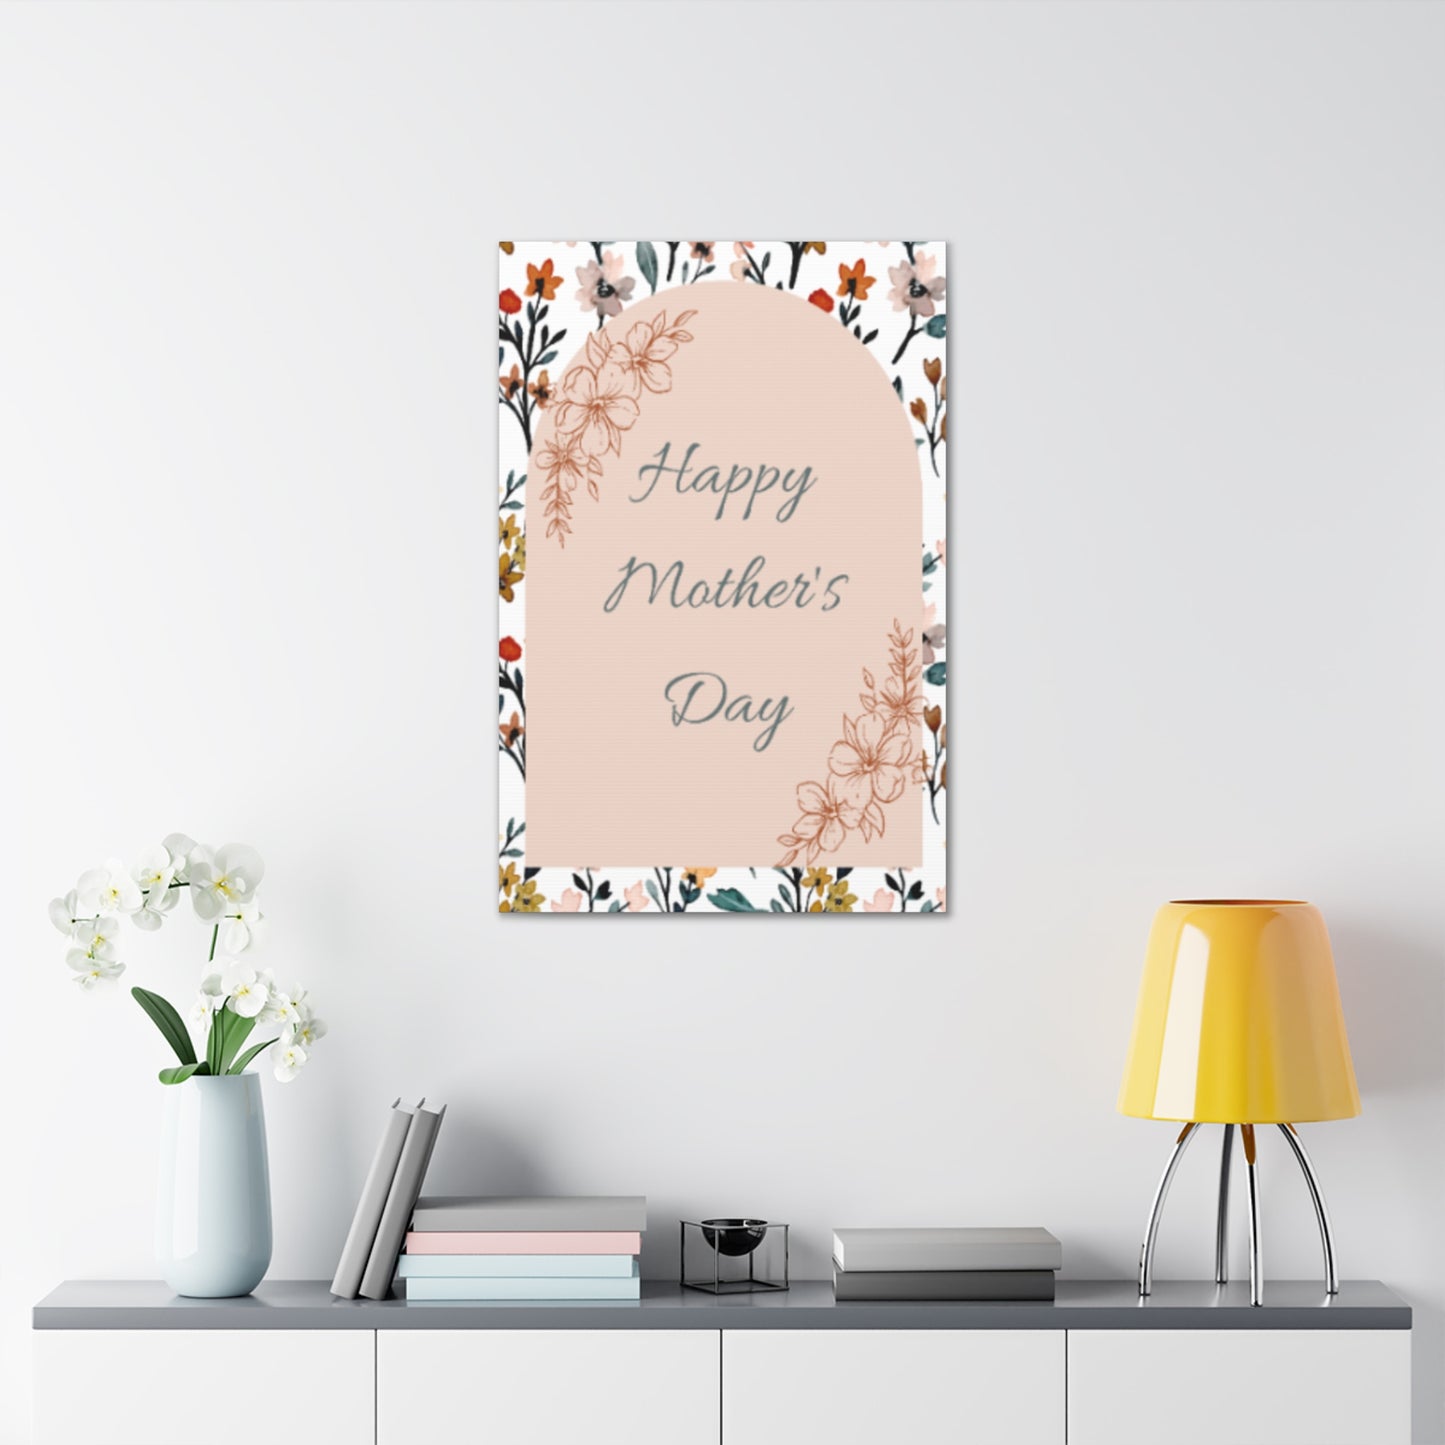 CANVAS 24x36 MOTHER'S DAY DESIGN #3